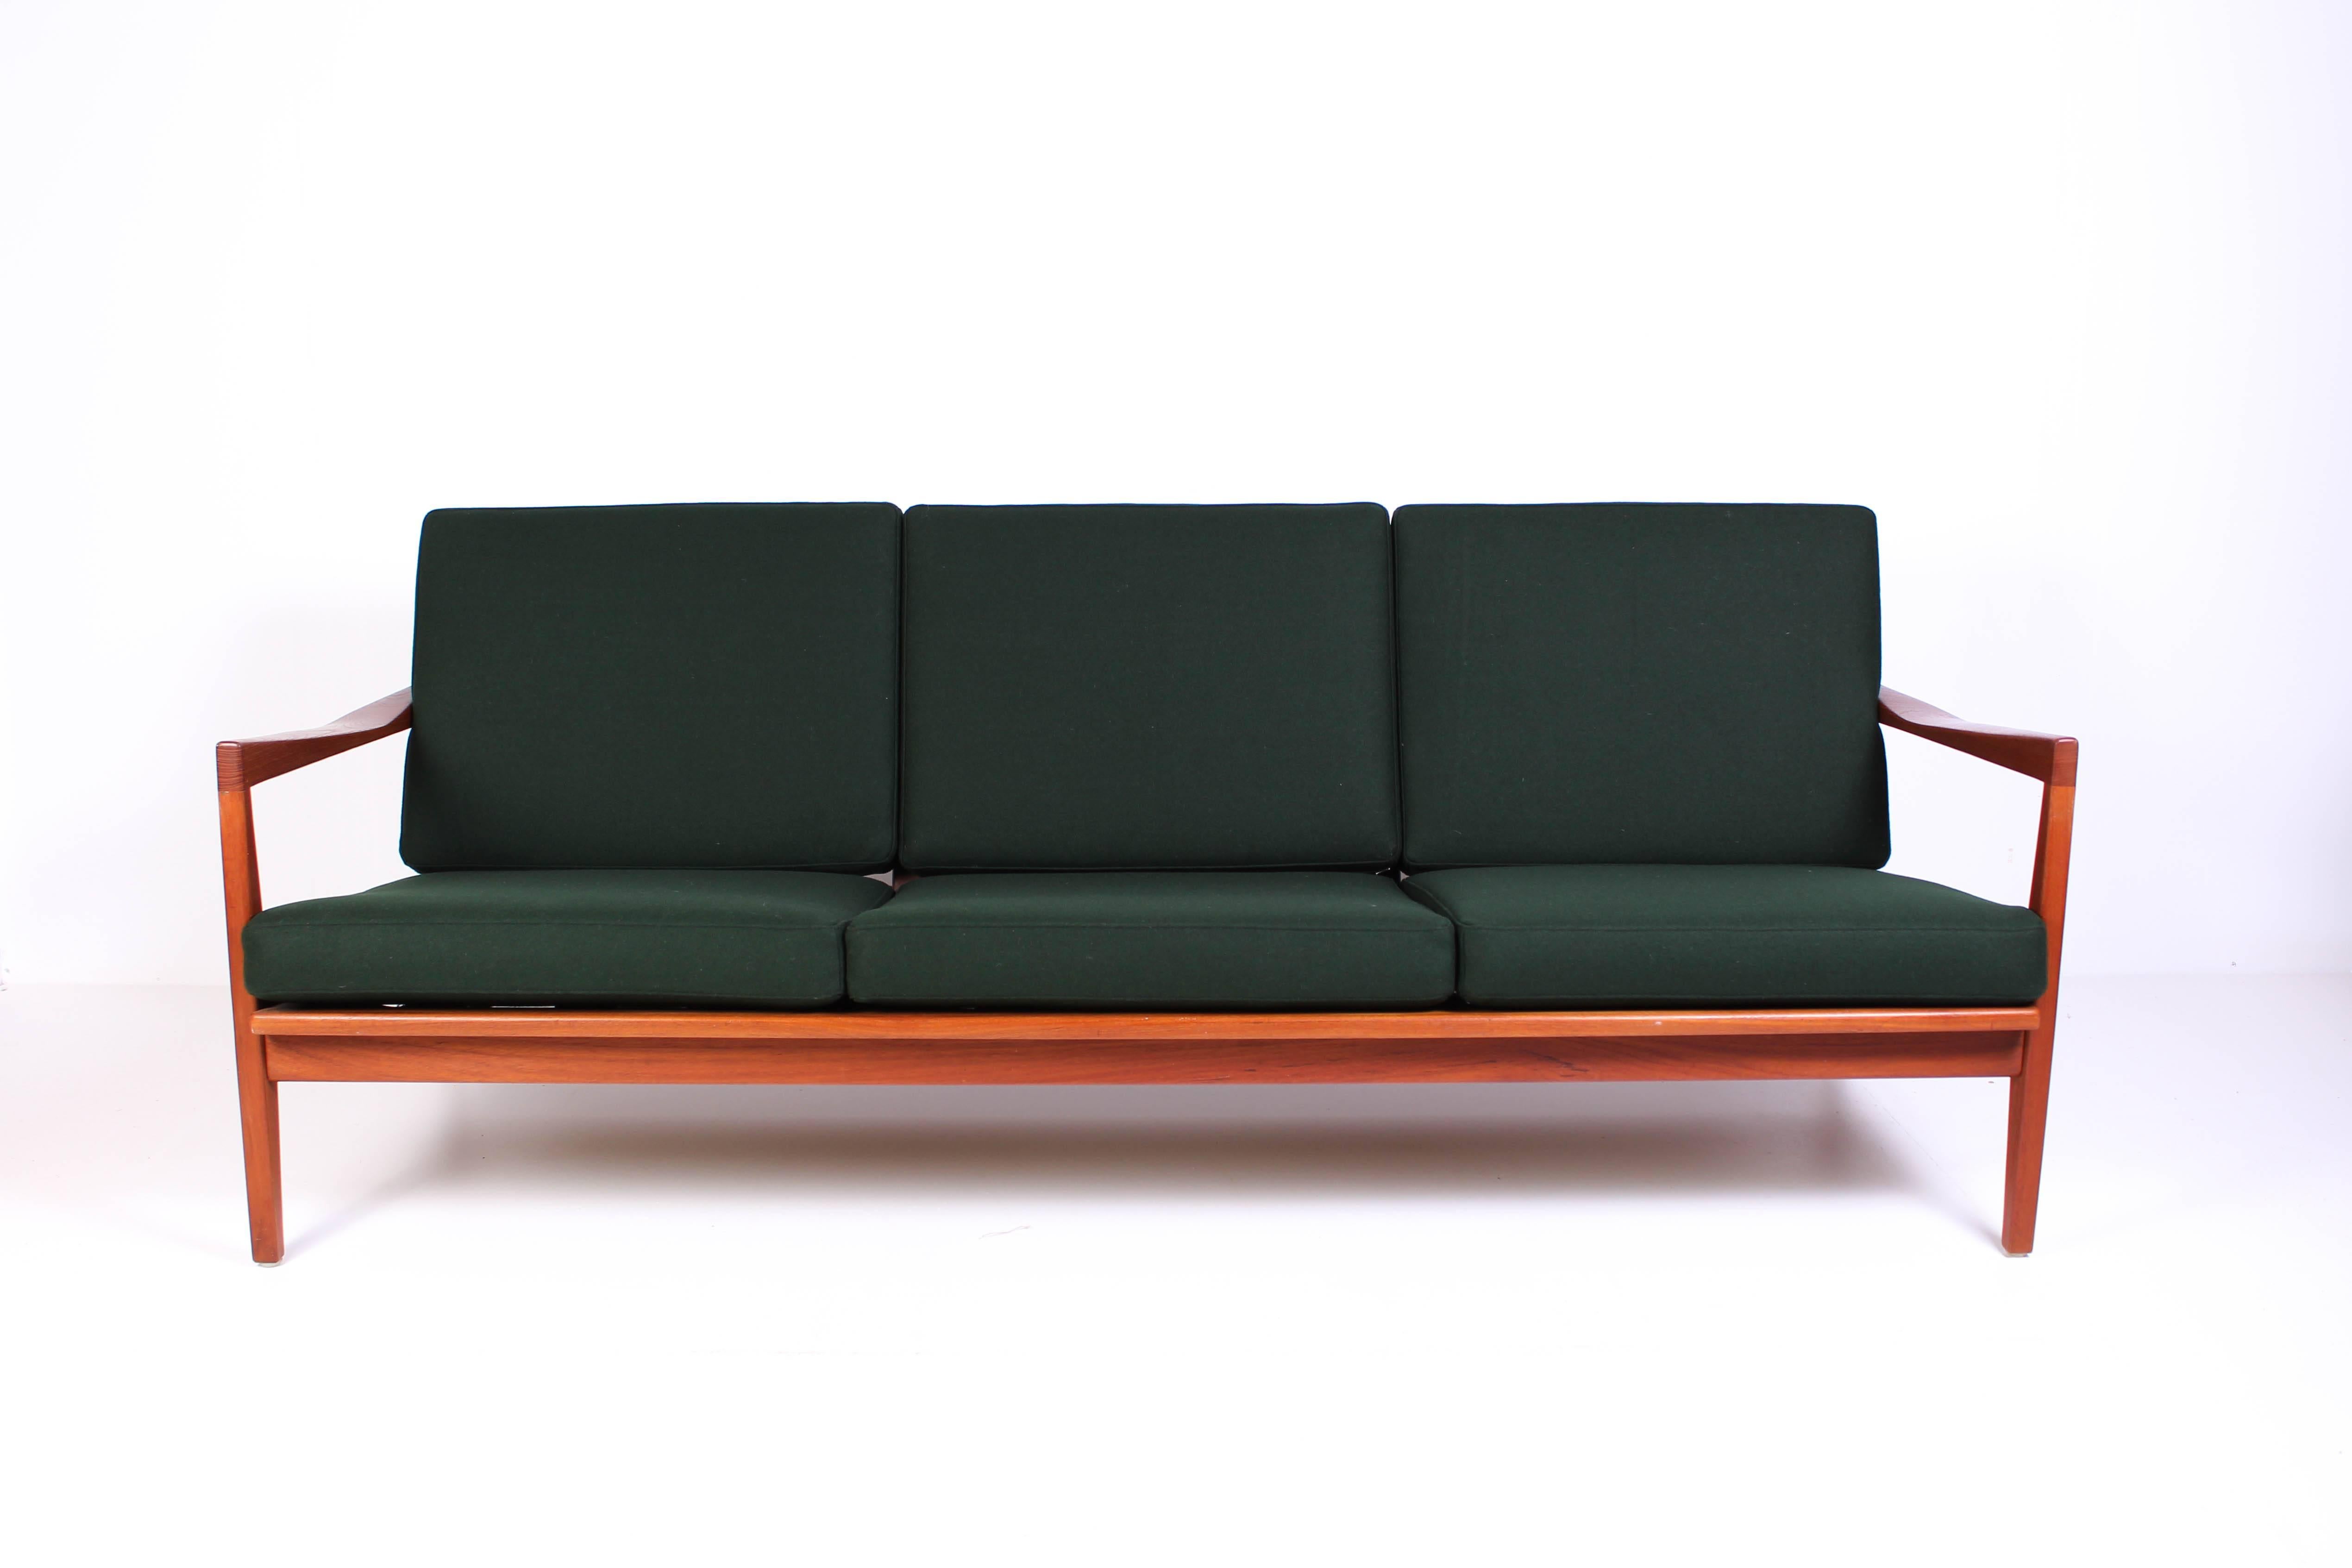 Midcentury Swedish teak sofa by Svante Skogh. This three-seat sofa has new cushions with 100% wool upholstery from Swedish manufacturer Klippan Yllefabrik and nice details such as sculptured backrest and brass fittings.
  